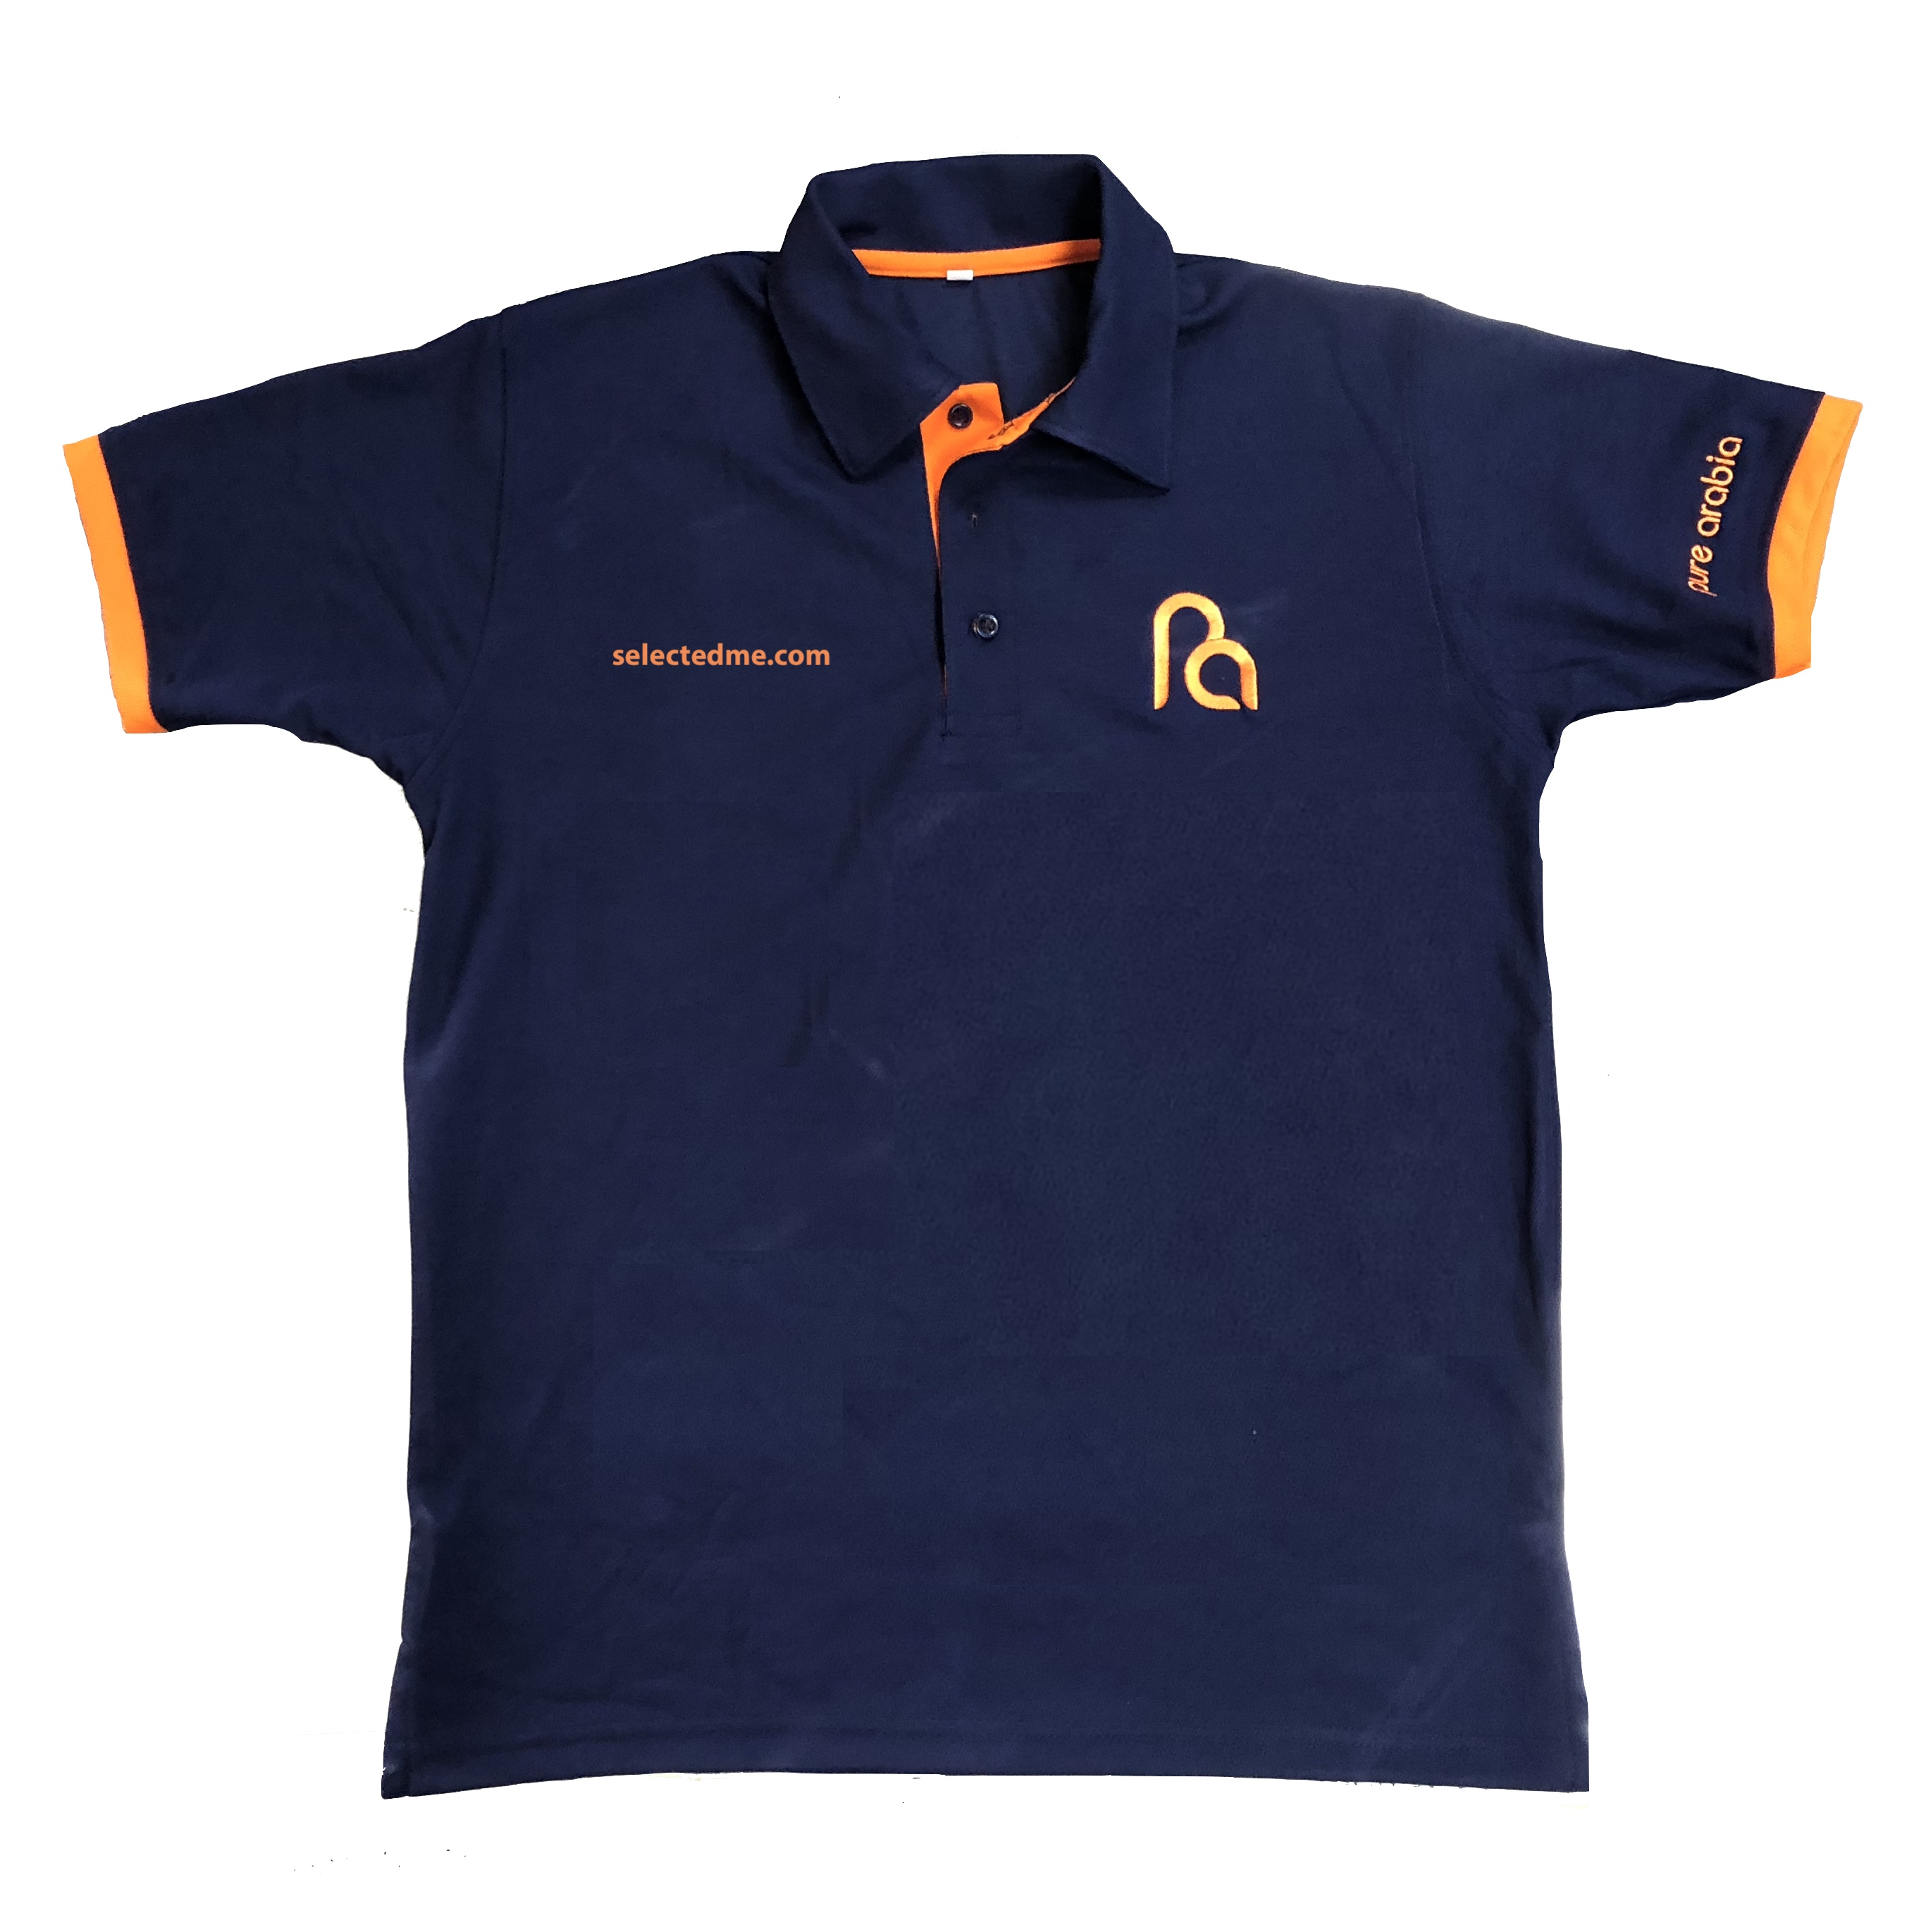 Dri-FIT Polo T-shirts - Dry FIT Tees 